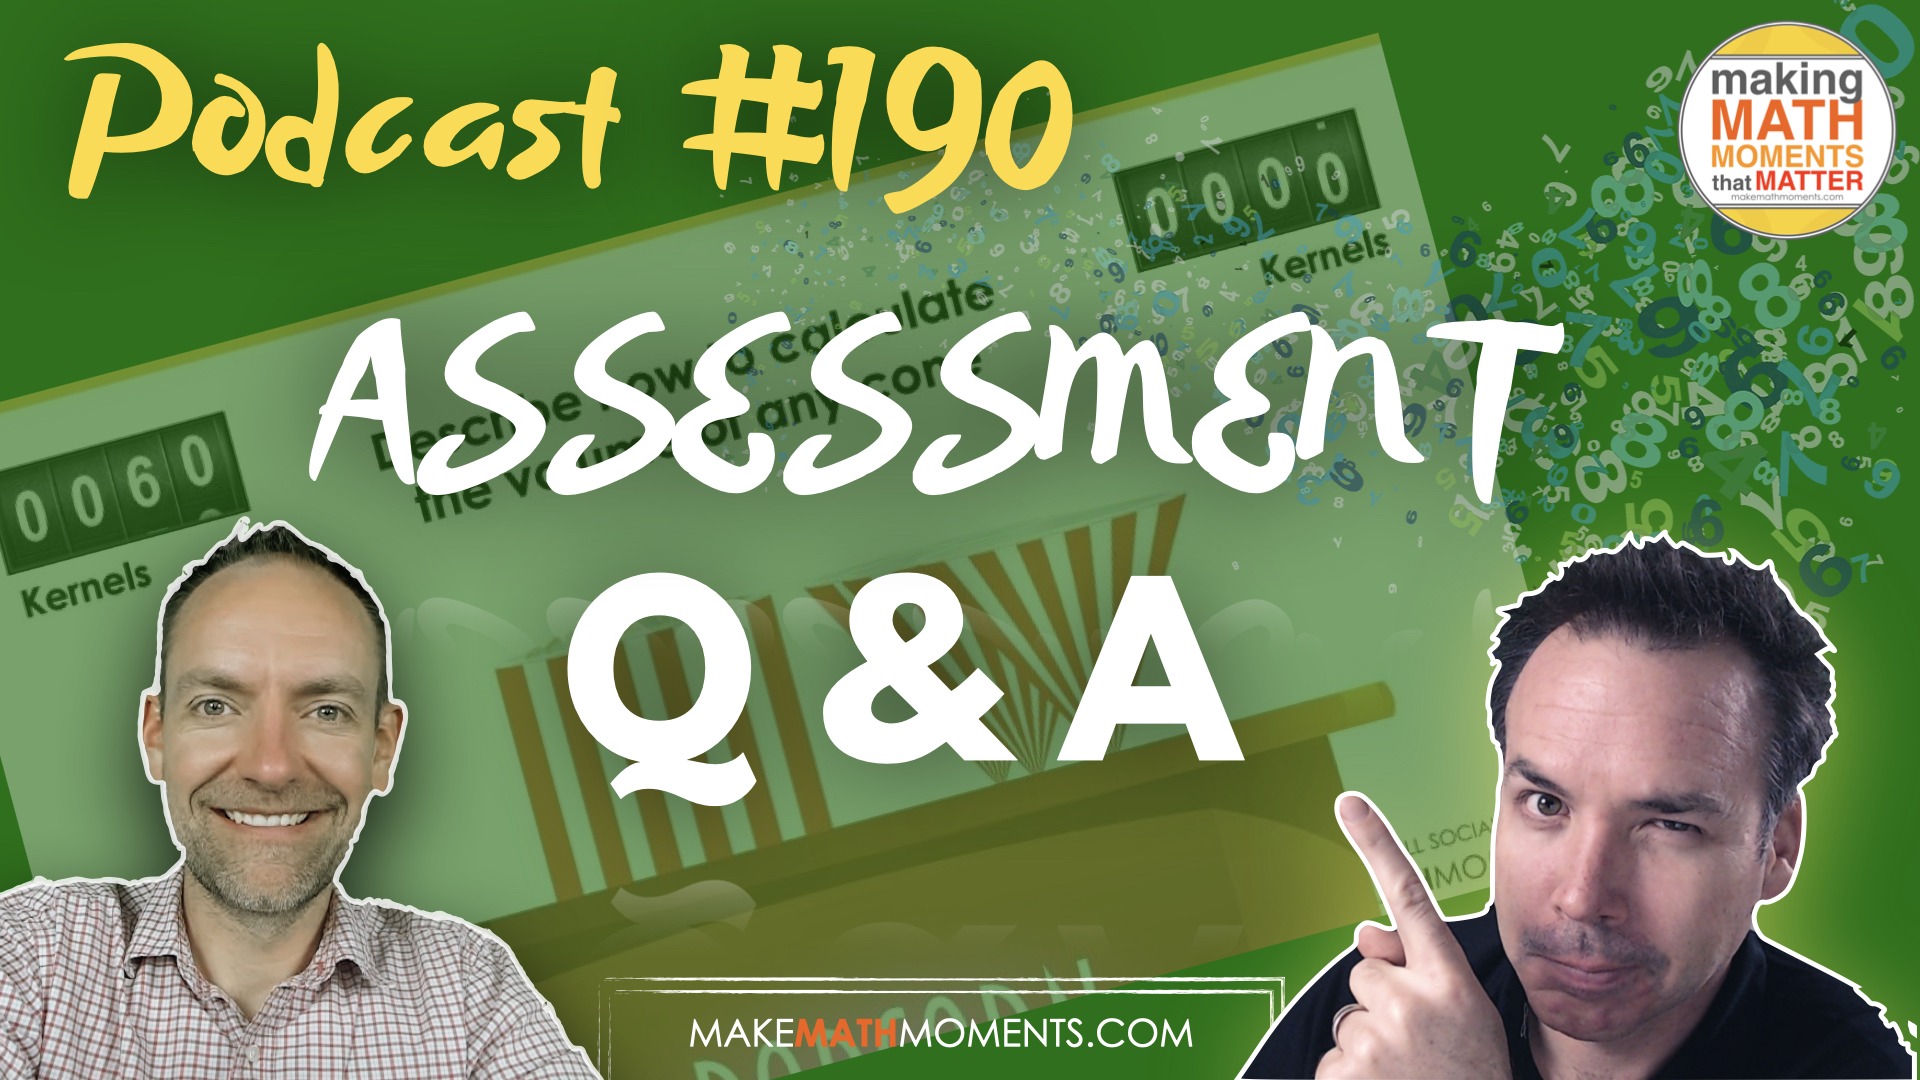 Episode 190 – Assessment Questions & Answers